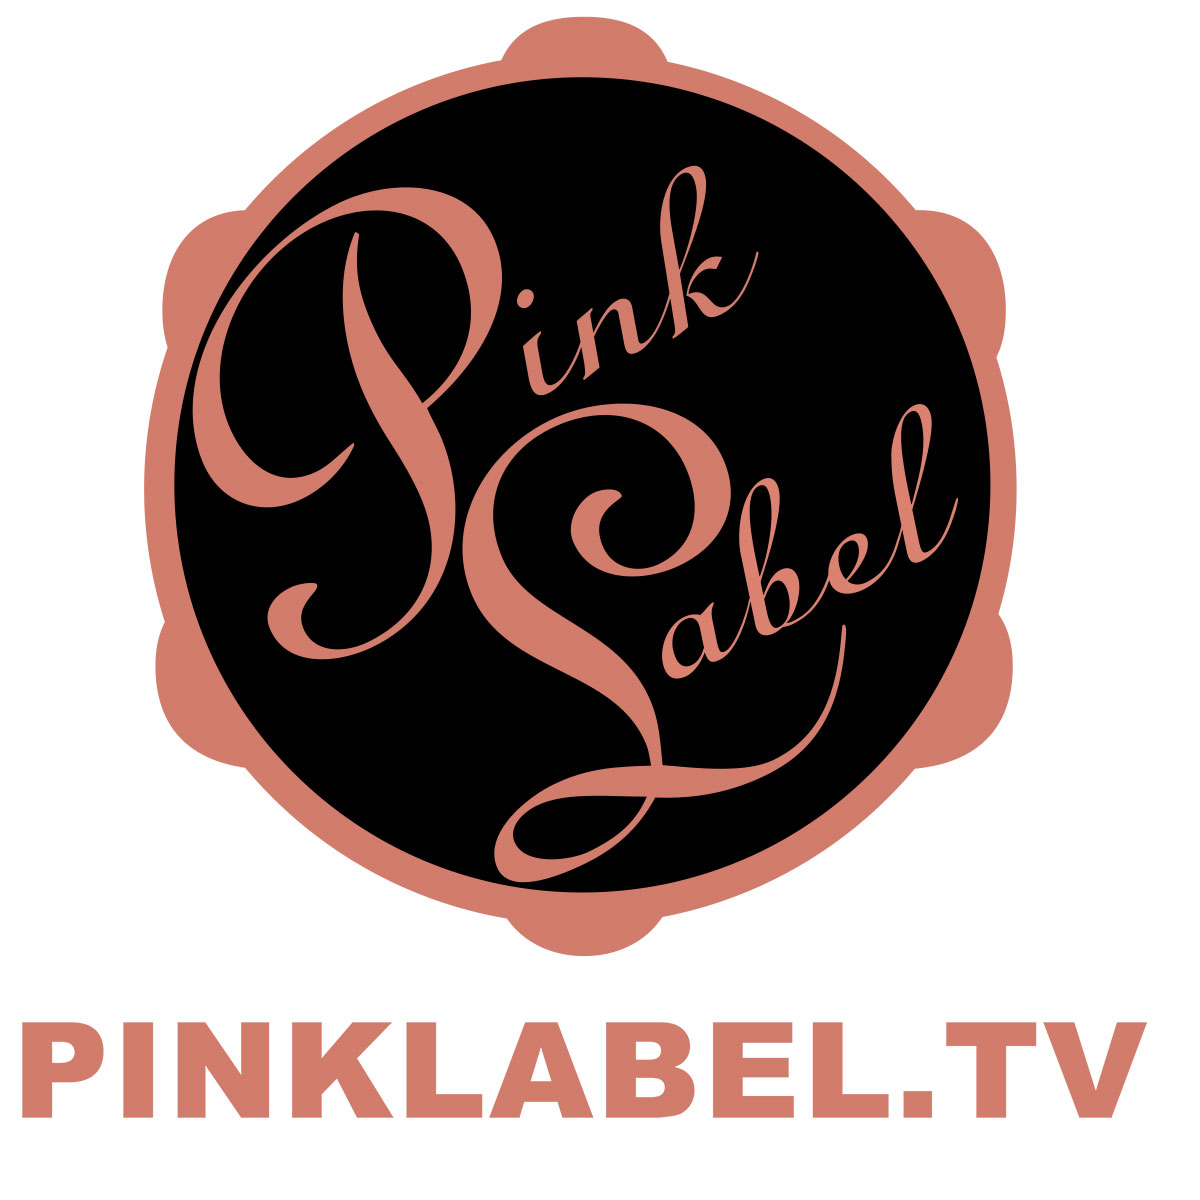 Pink lable tv